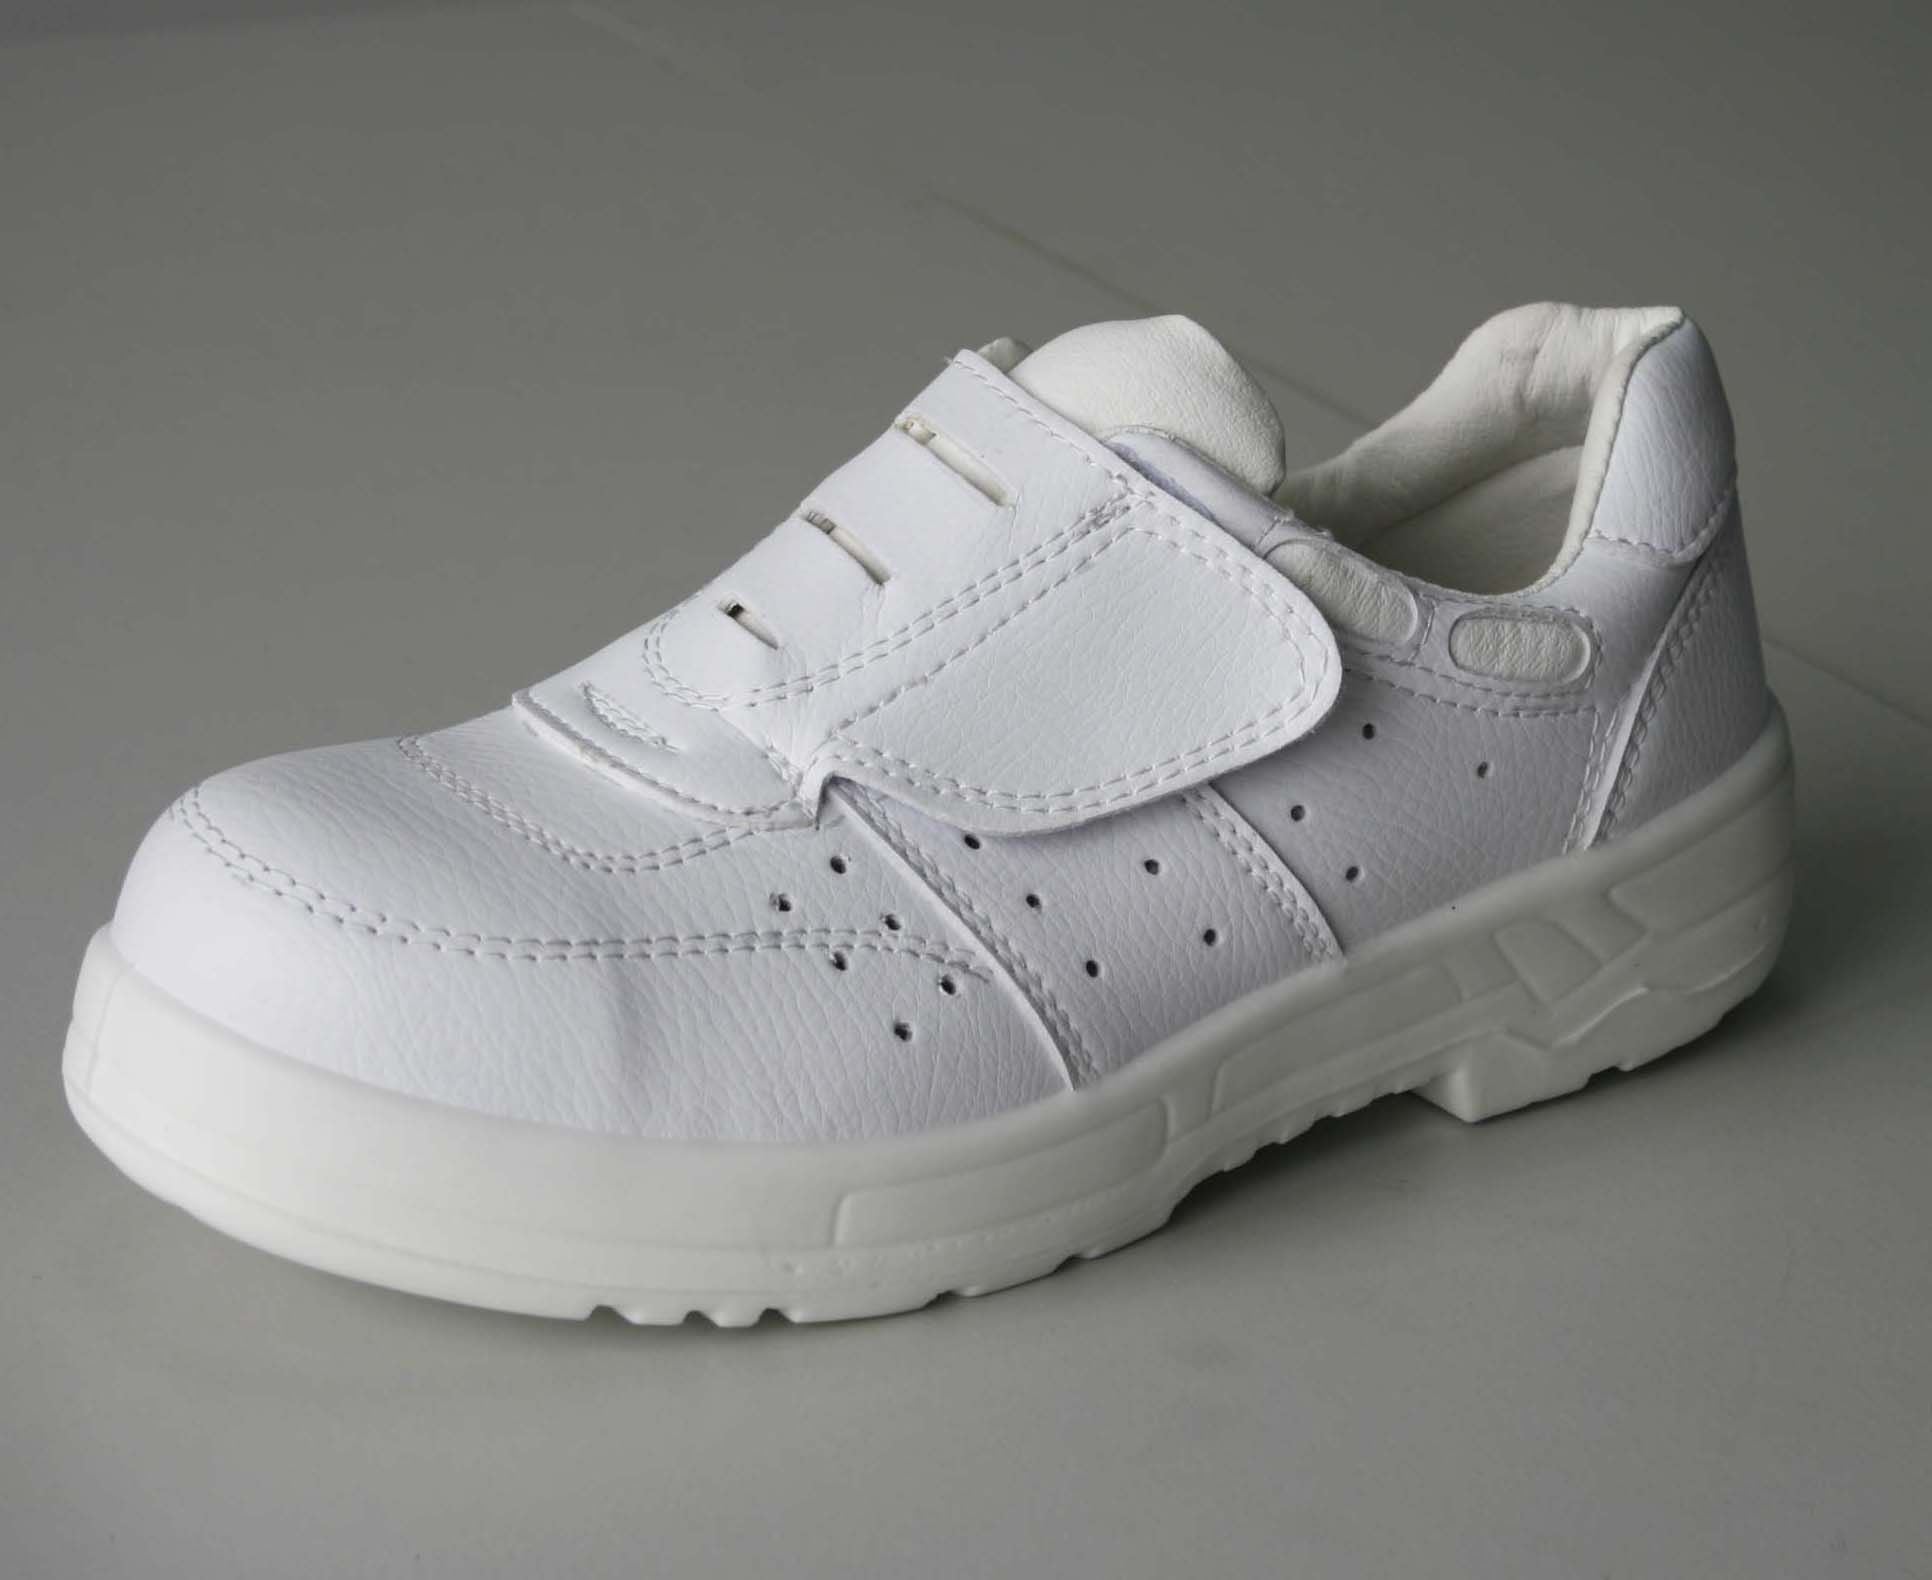 Cleanroom White Safety Shoes